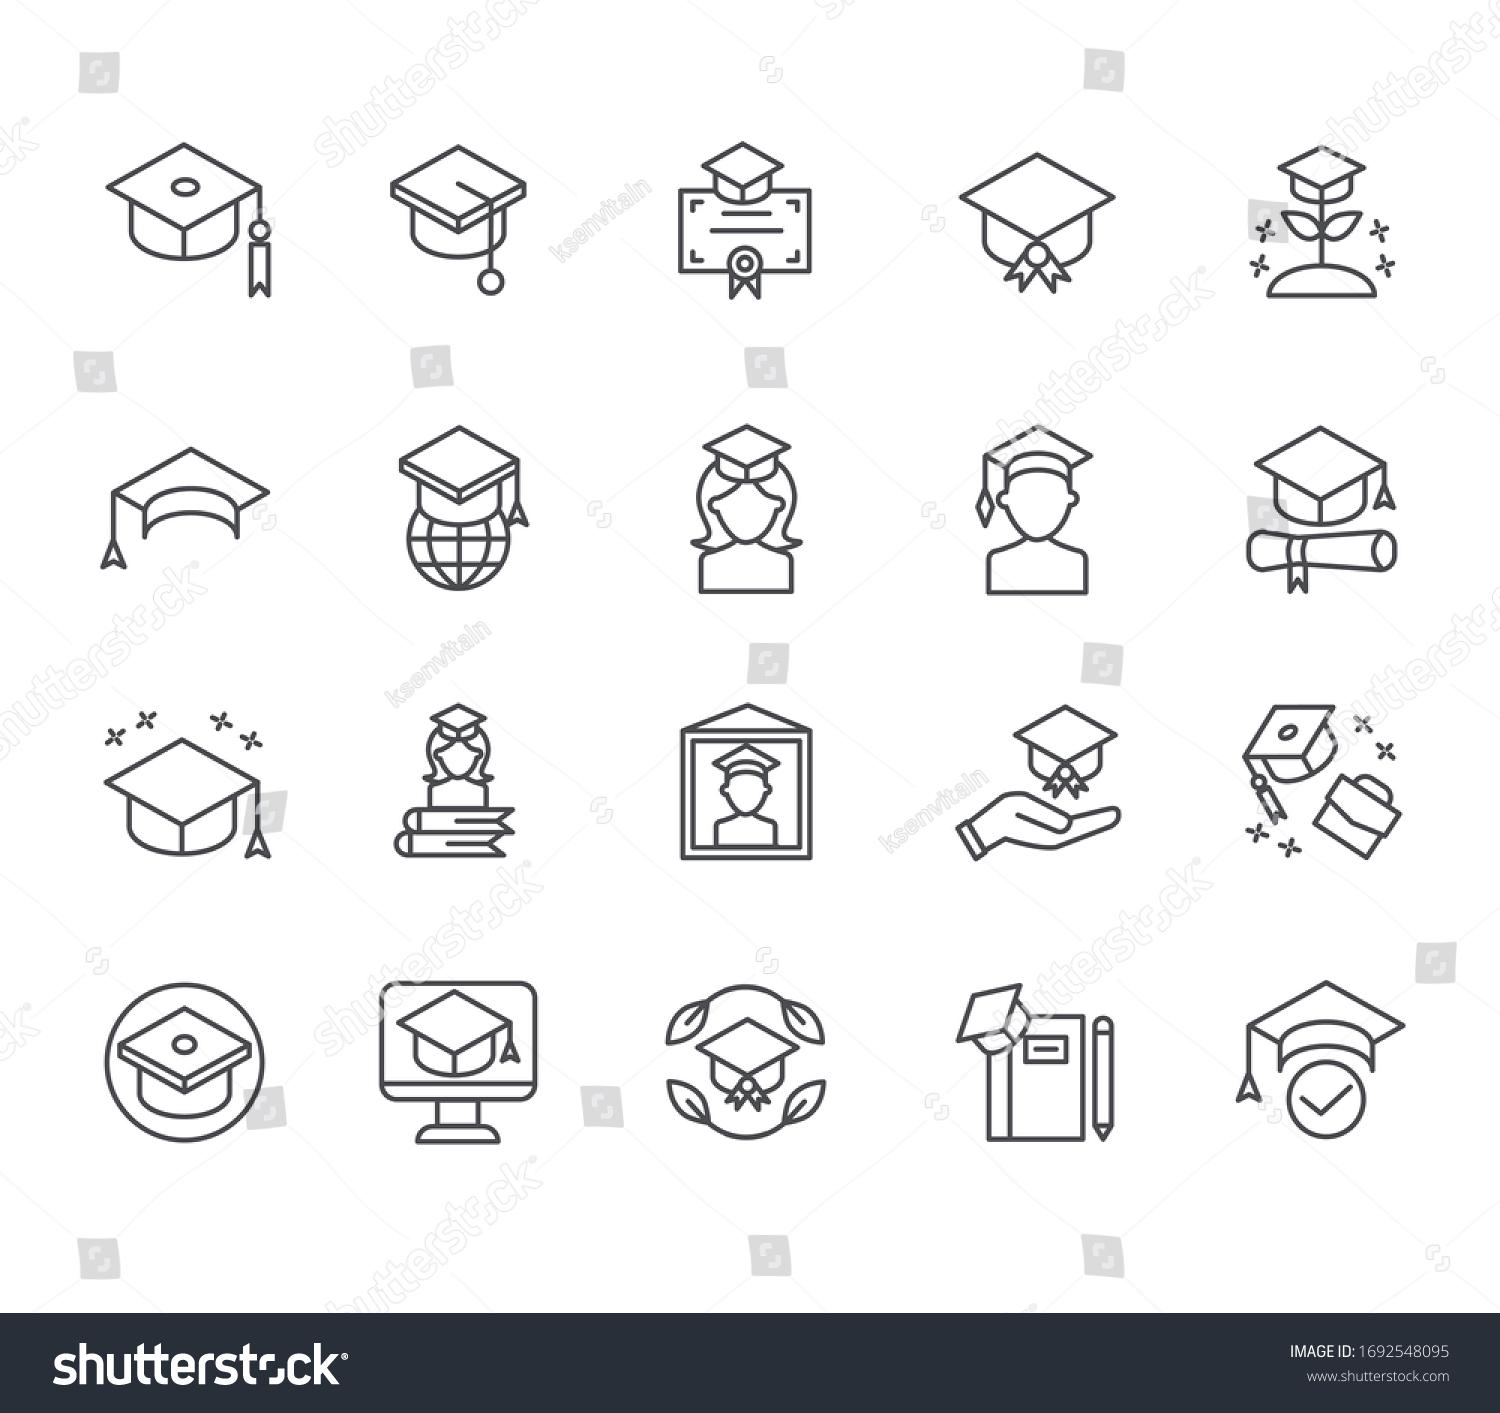 Set of graduation cap Related Vector Line Icons. Includes such Icons as University, master's degree, student, diploma, science, dissertation, scientific work, knowledge and more. #1692548095